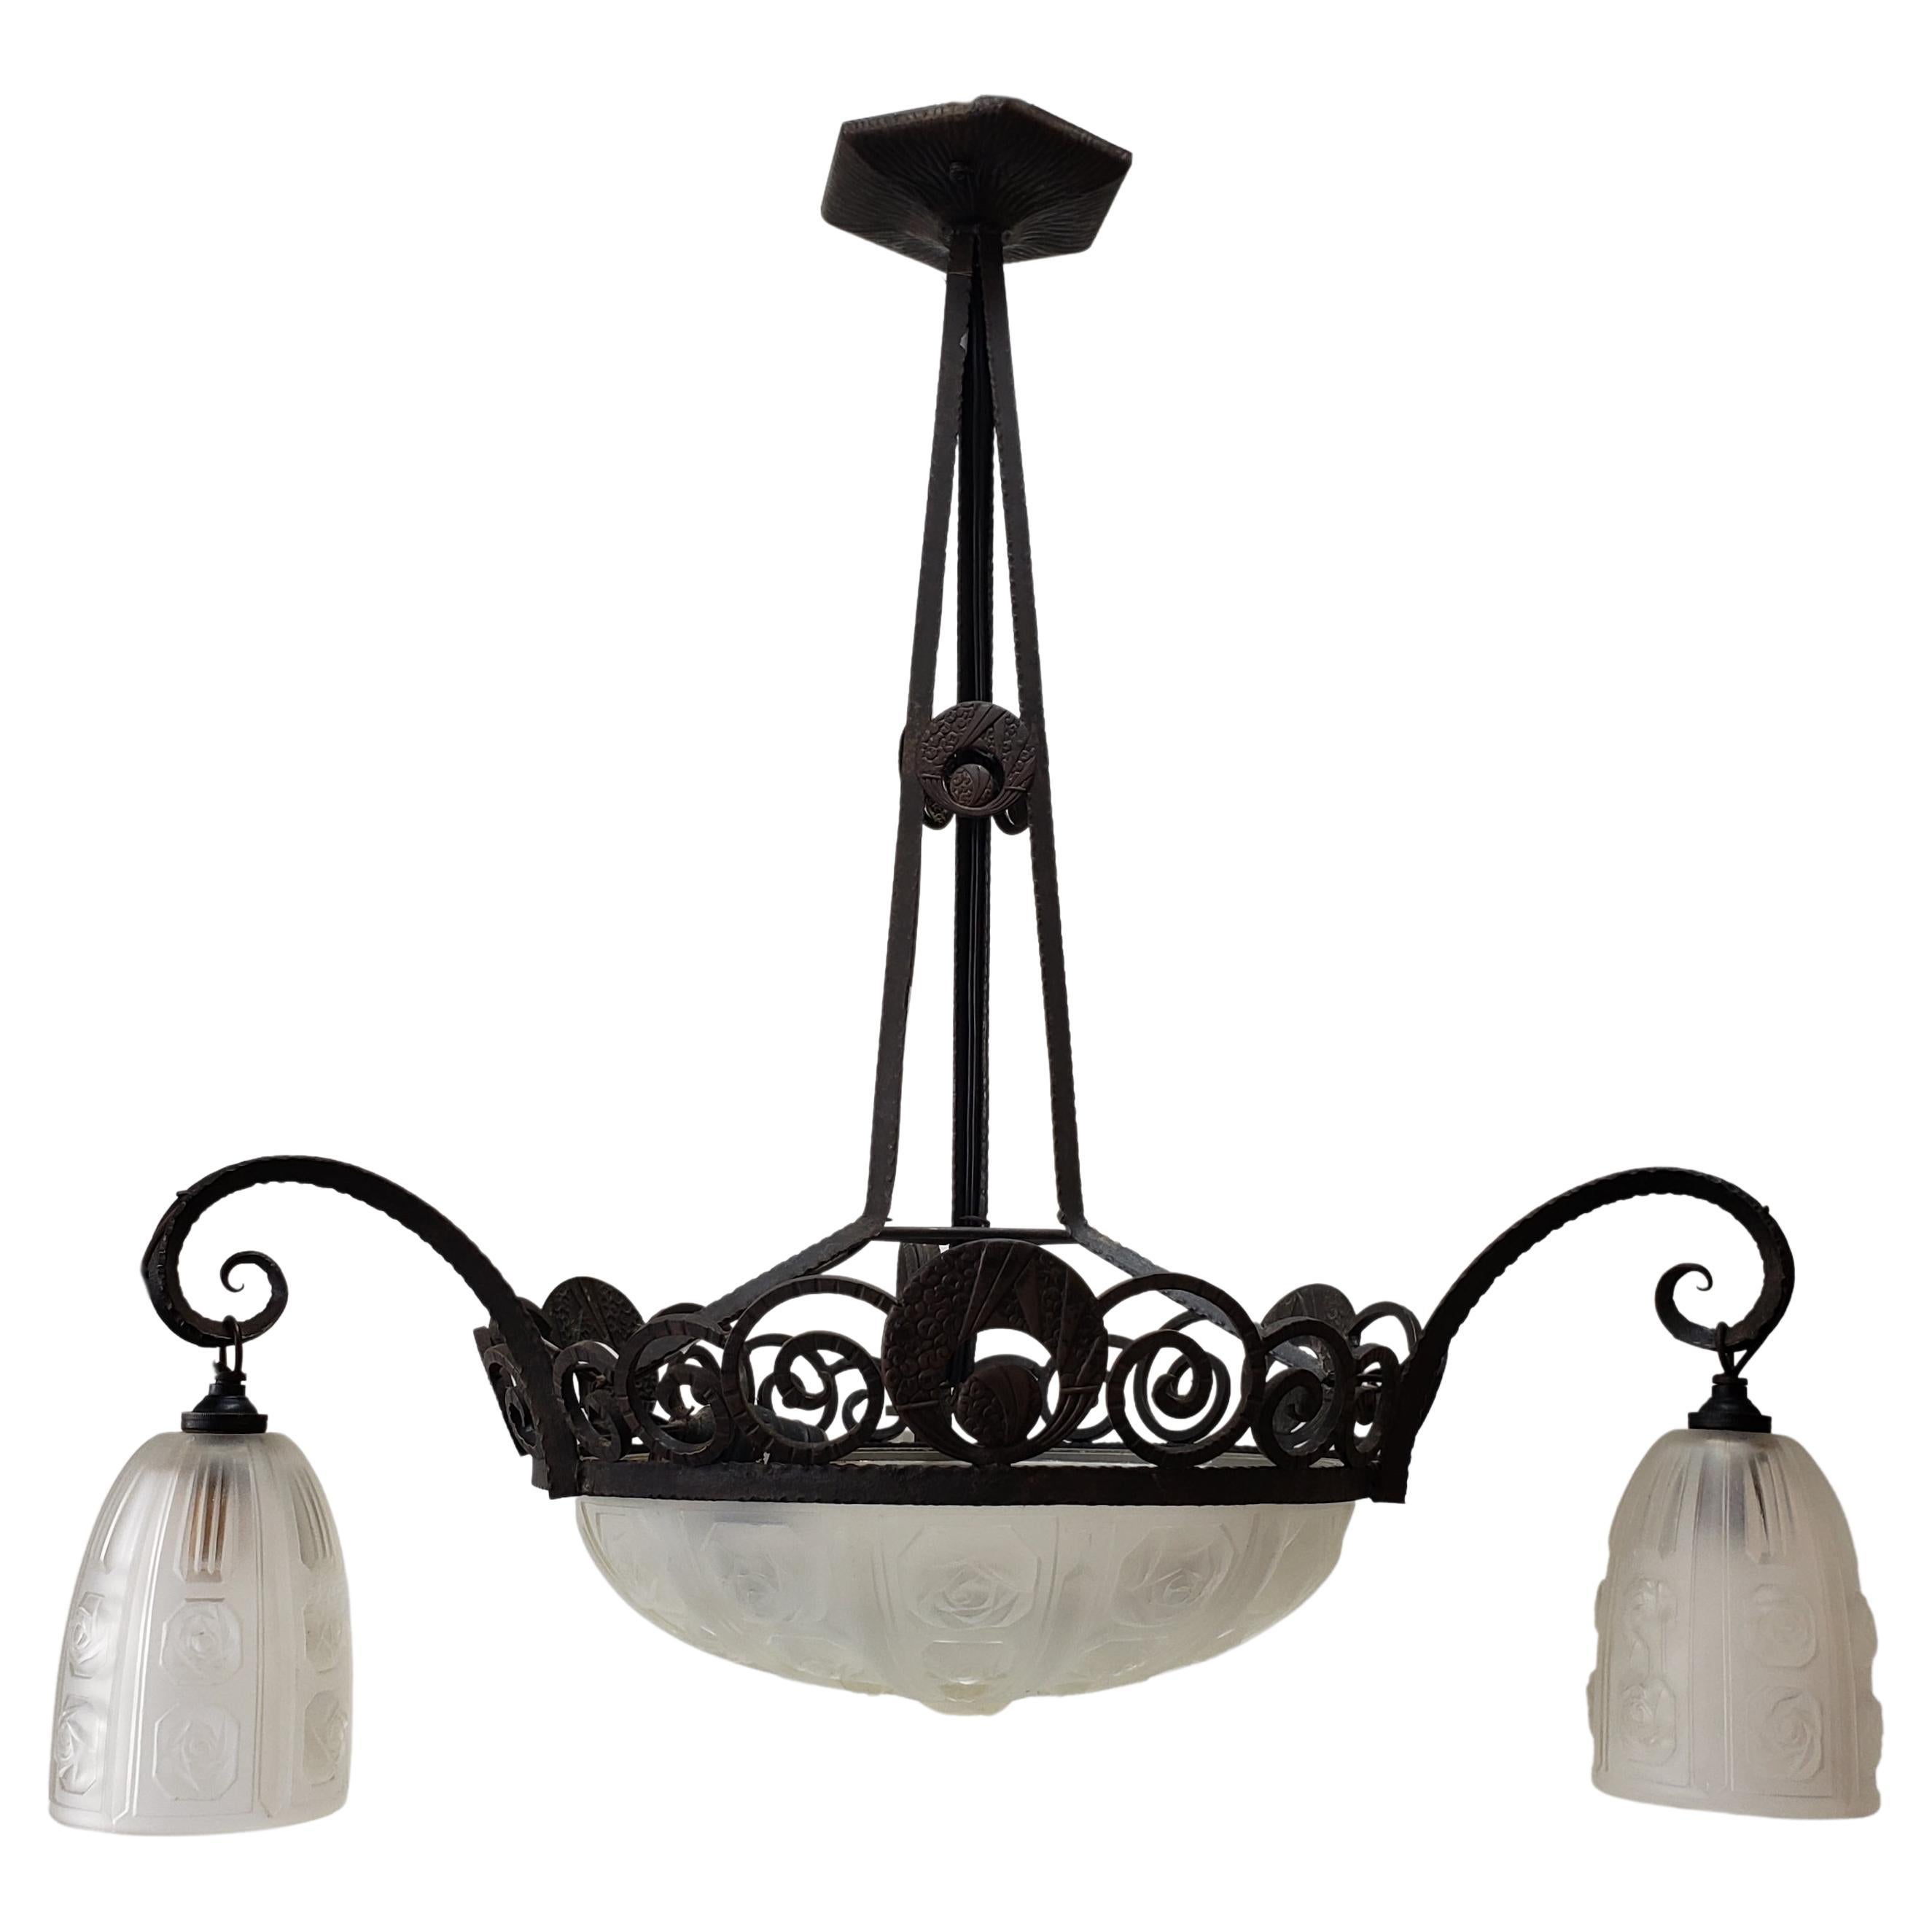 French Art Deco Wrought Iron and Cased Glass Chandelier For Sale